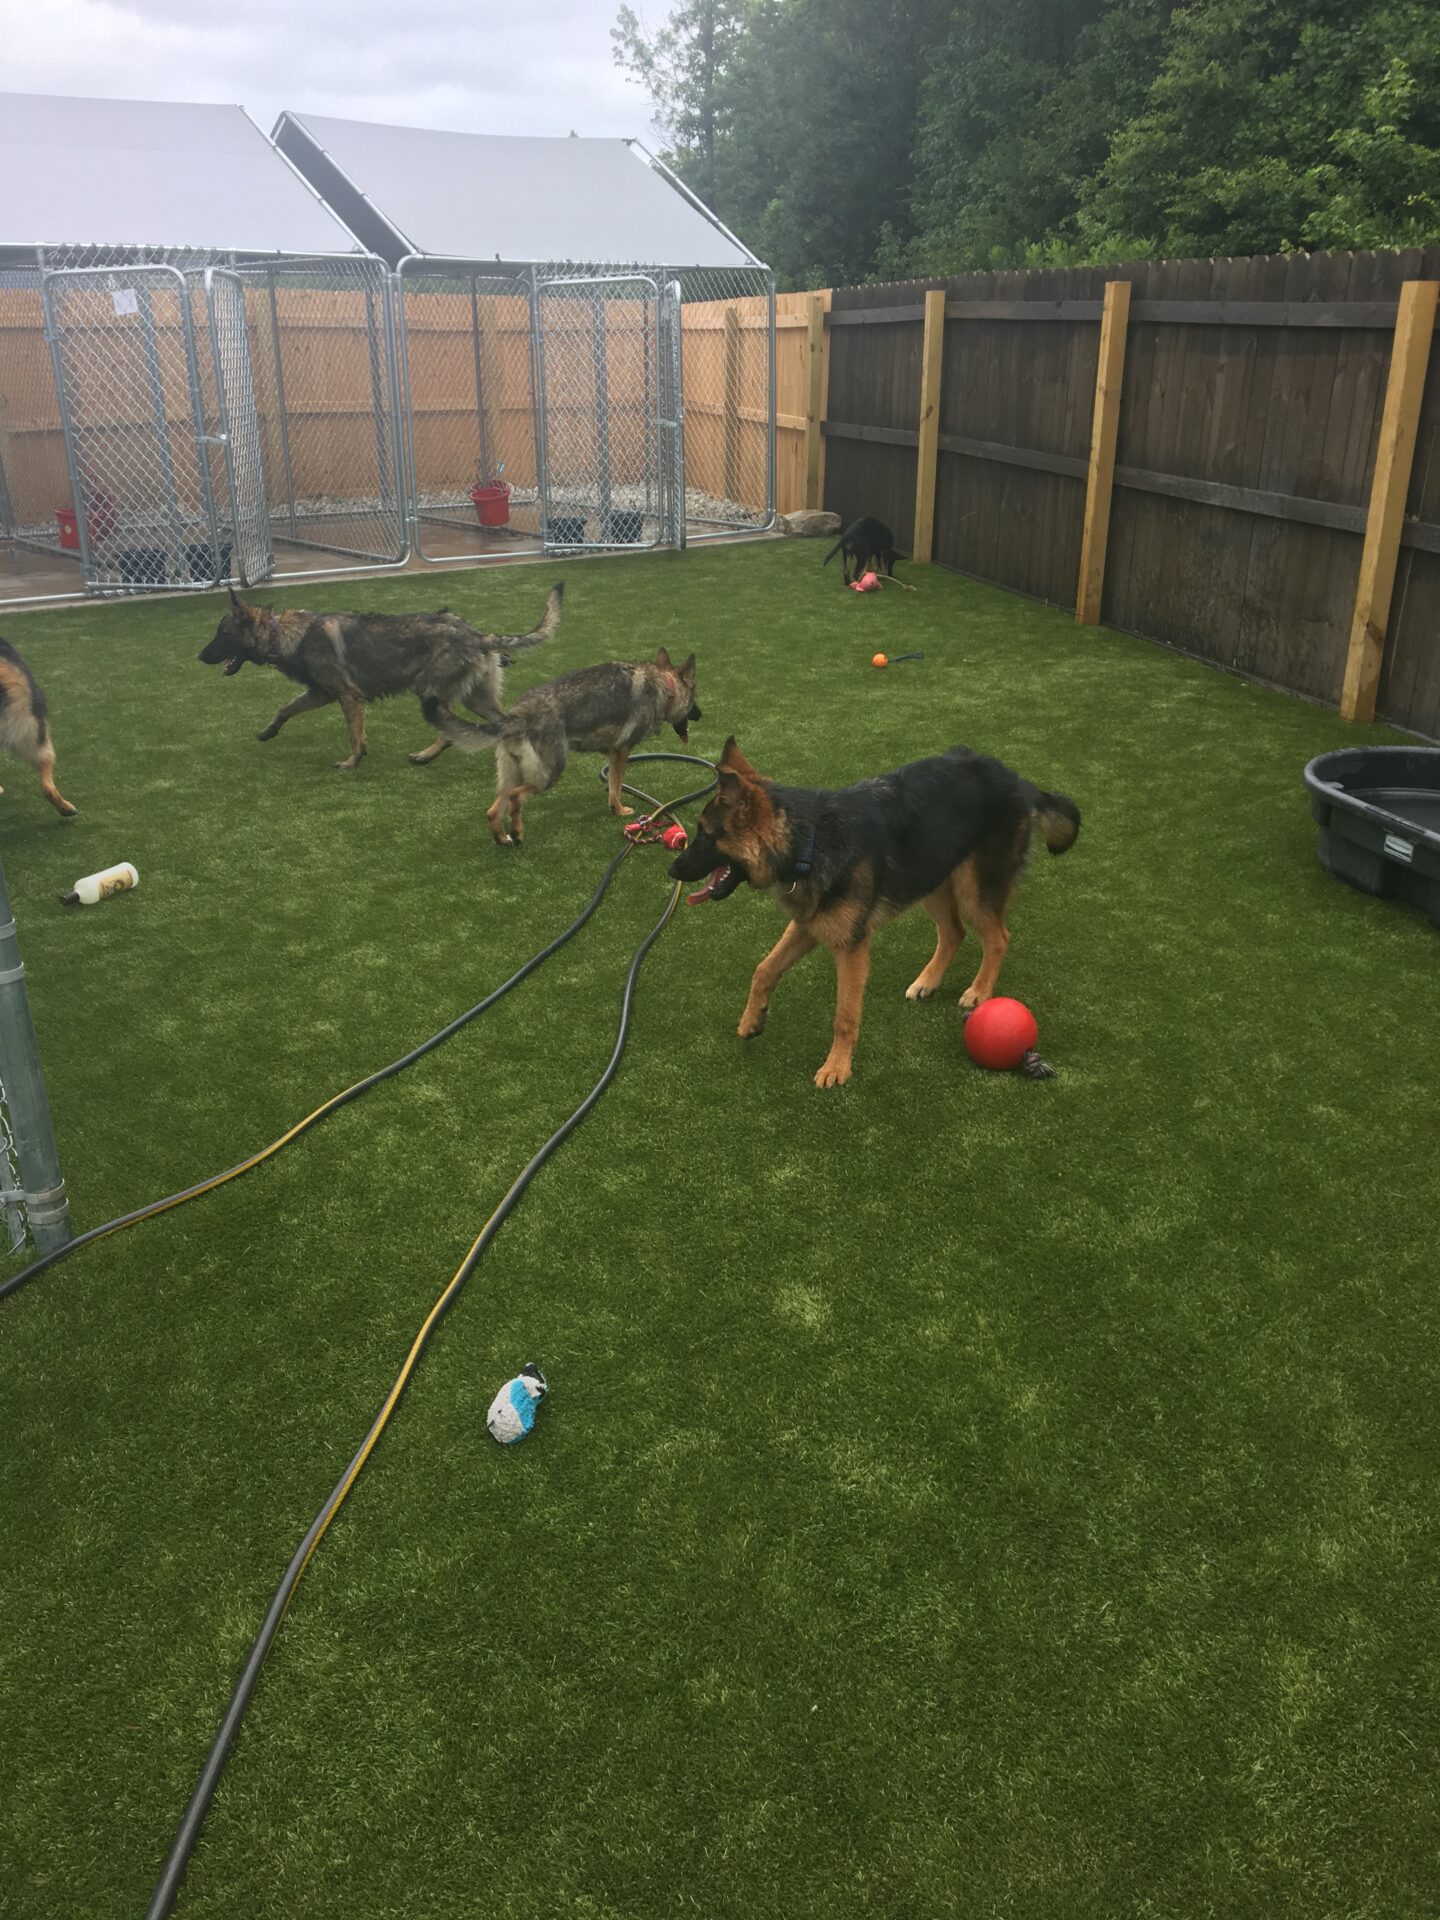 Several German Shepherds in a fenced yard with artificial grass, scattered toys, and a hose. The dogs are engaging in various activities, including playing.